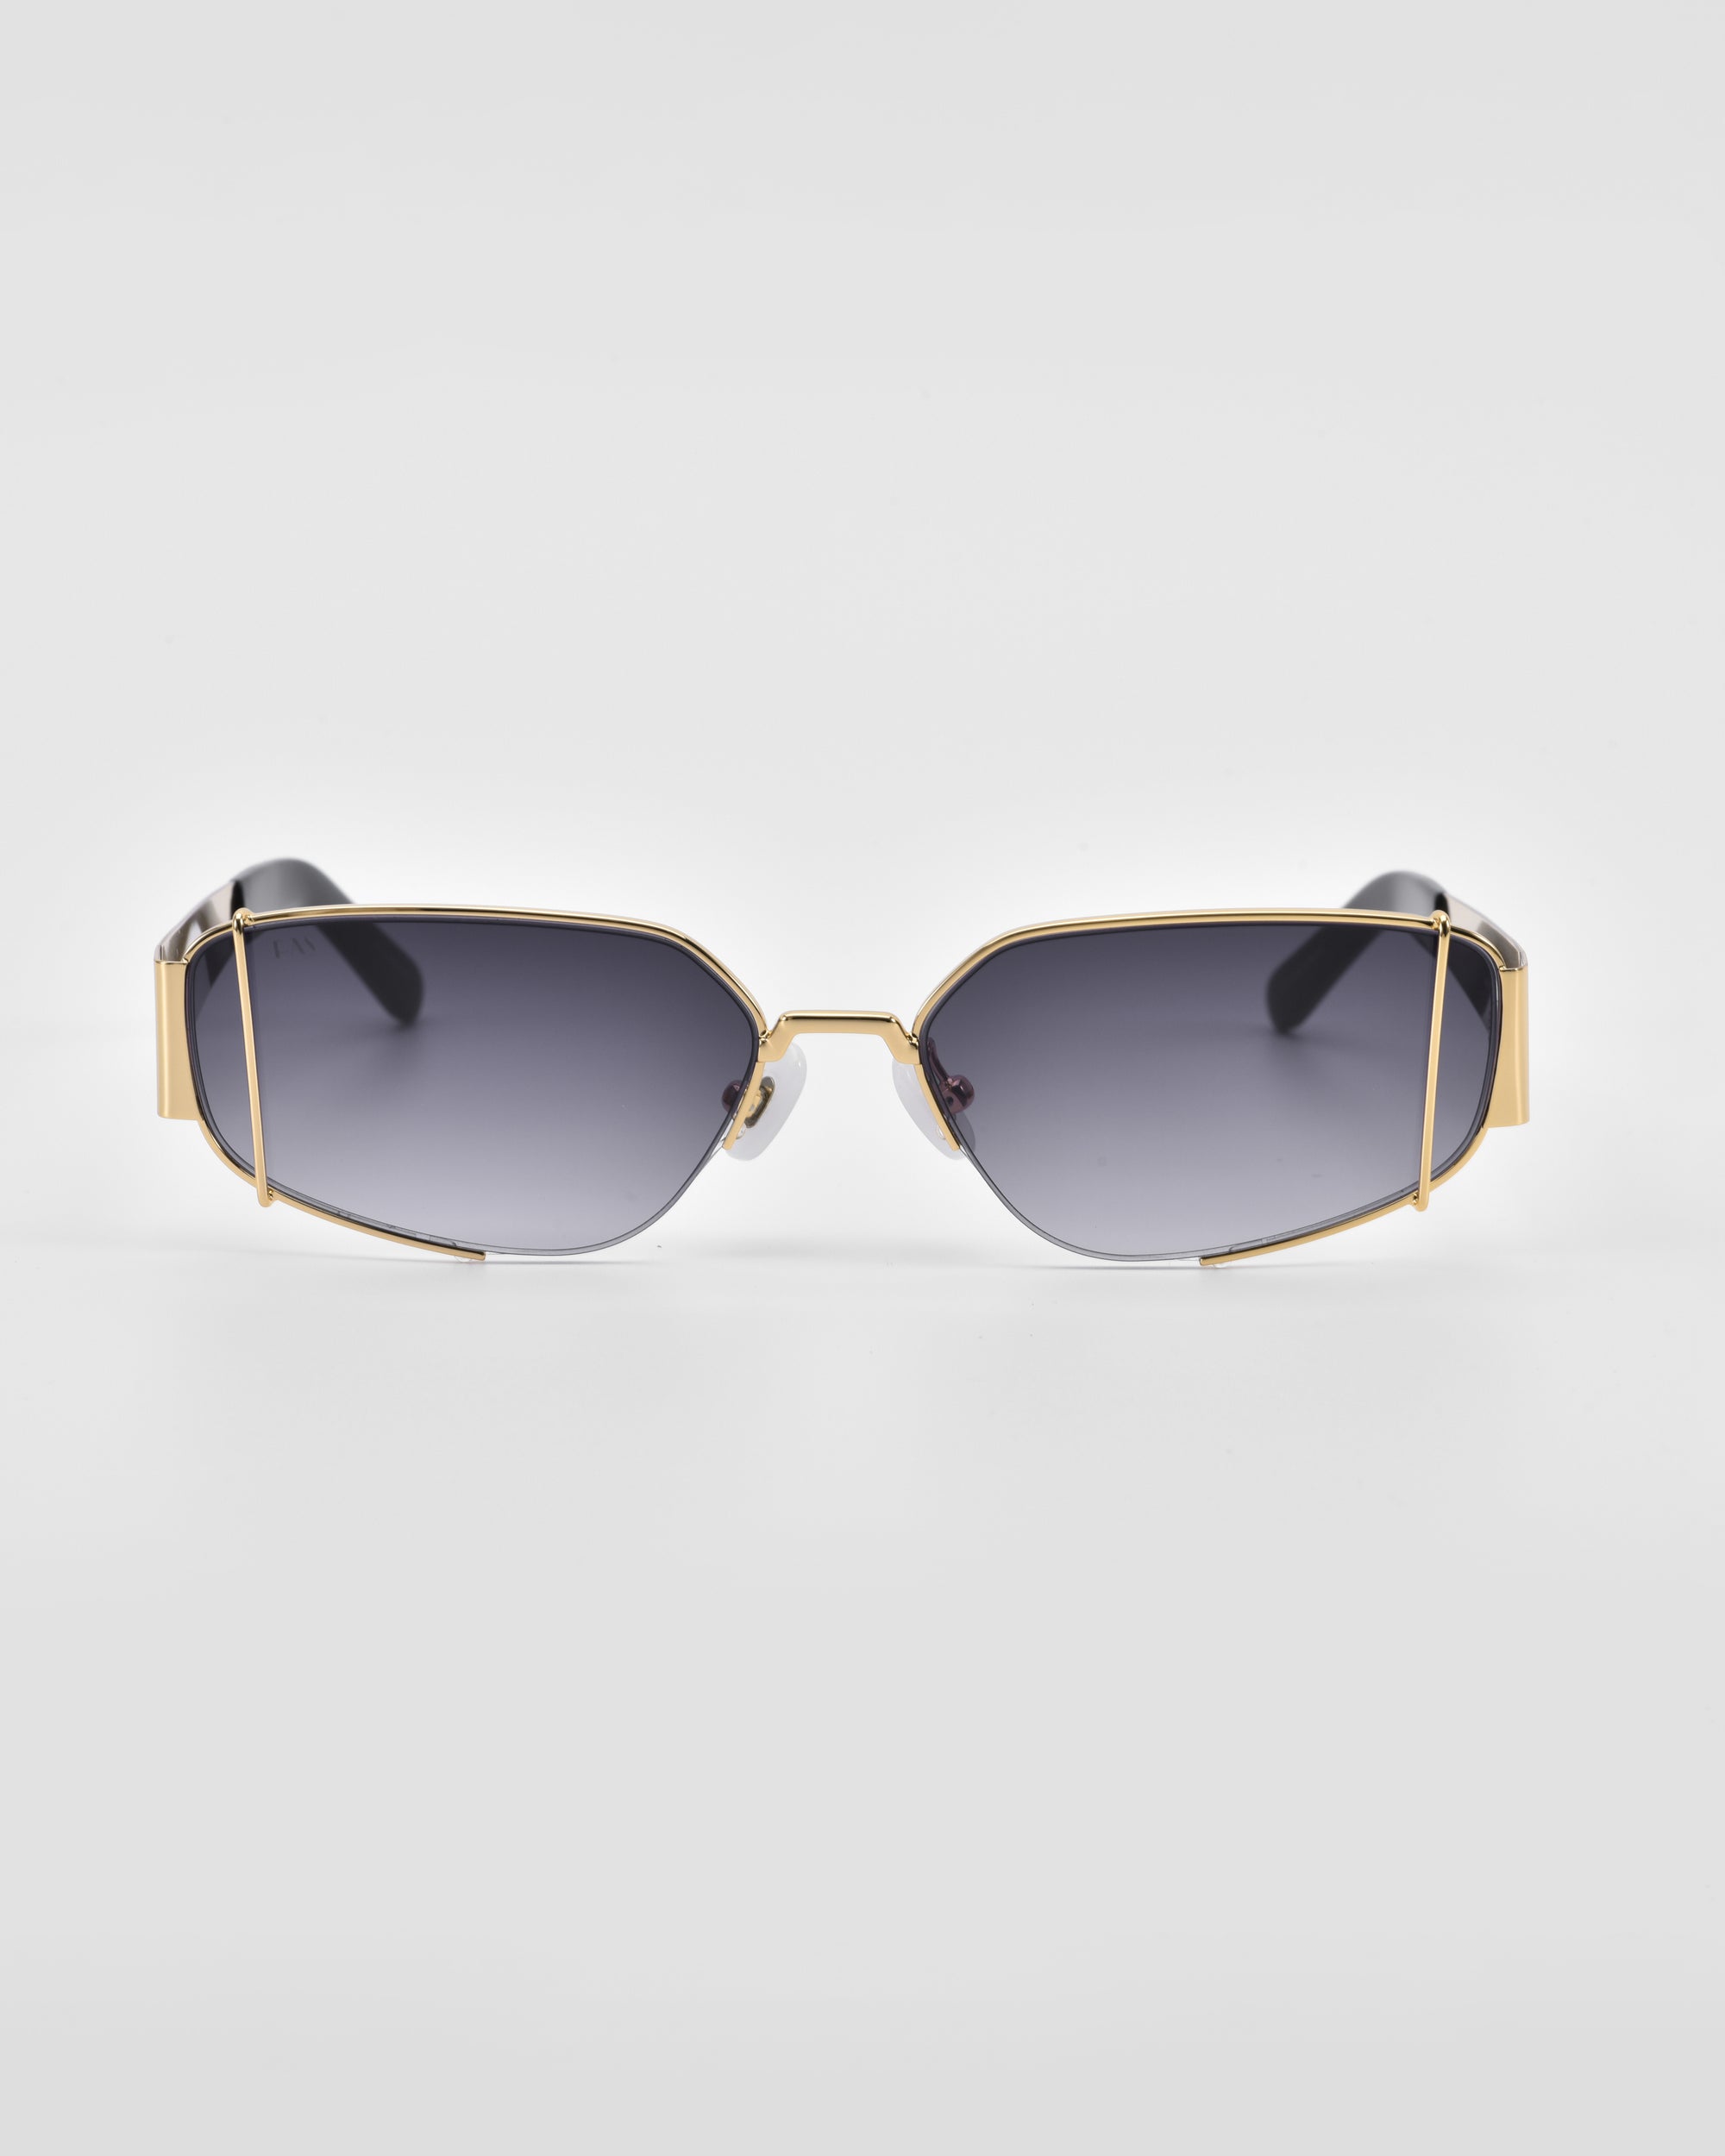 Gold-trimmed, rectangular sunglasses with dark gradient lenses against a white background. *Talia* by *For Art's Sake®* features 18-karat gold frames with unique angular design accents on the top corners and a delicate nose bridge. The temples are thick and blend into black tips.